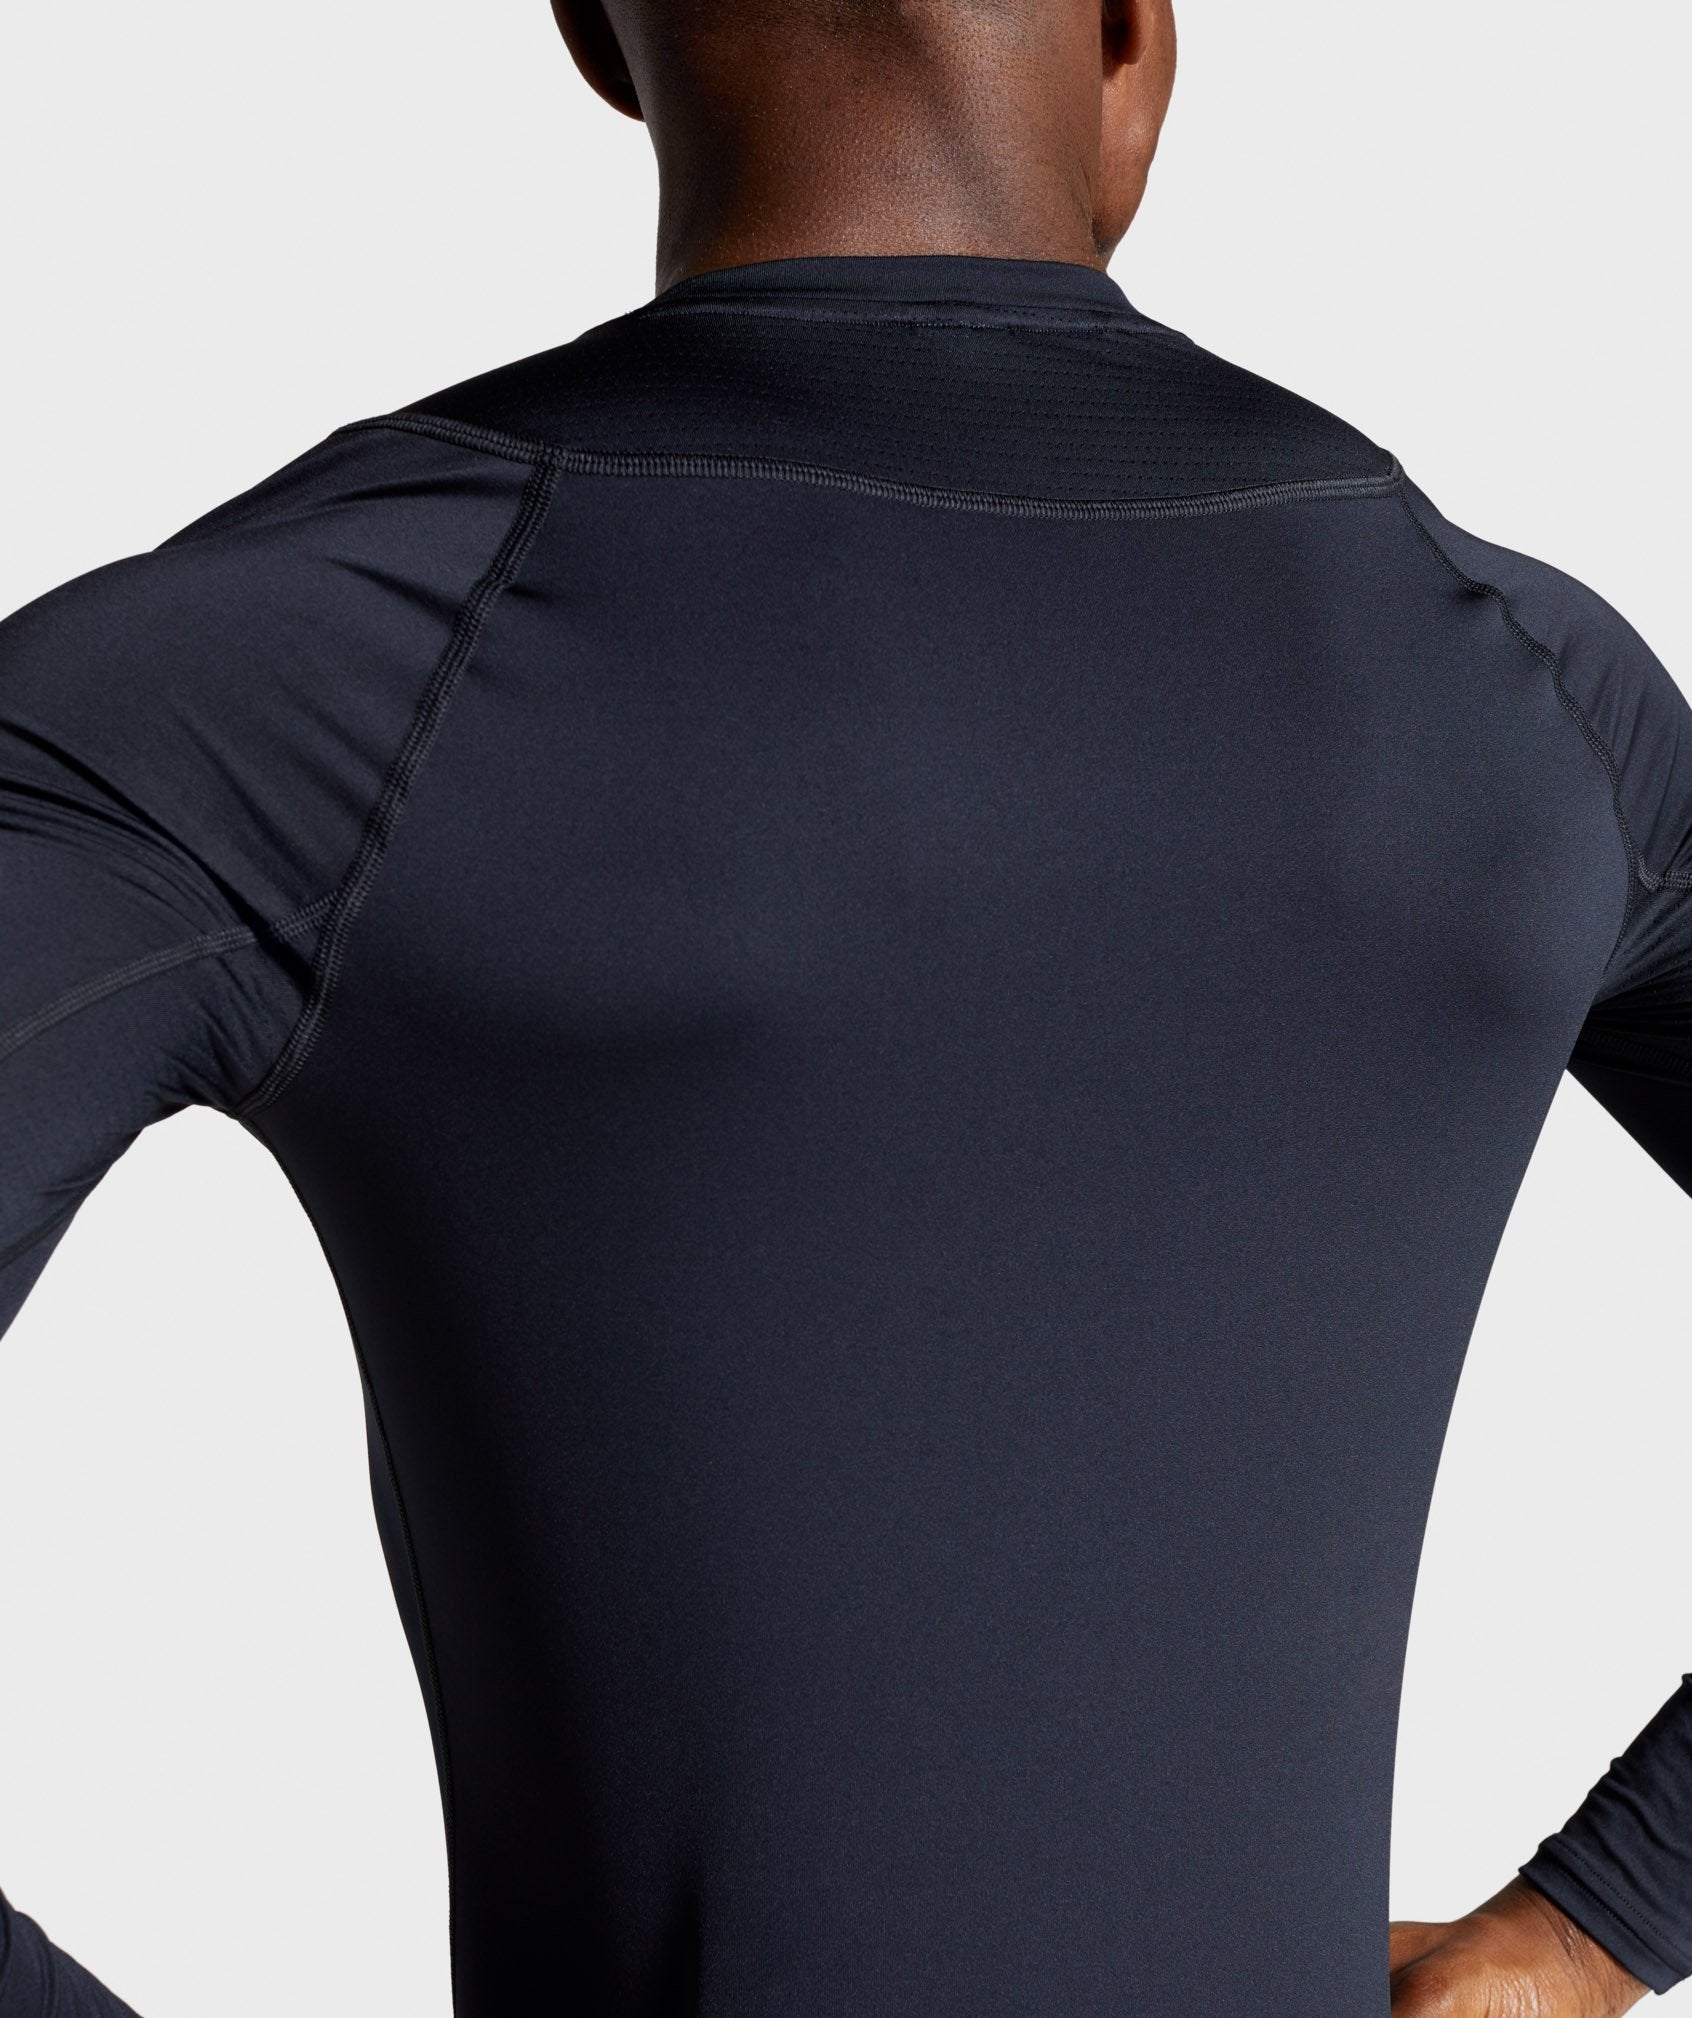 Element Baselayer Long Sleeve T-Shirt in Black - view 6